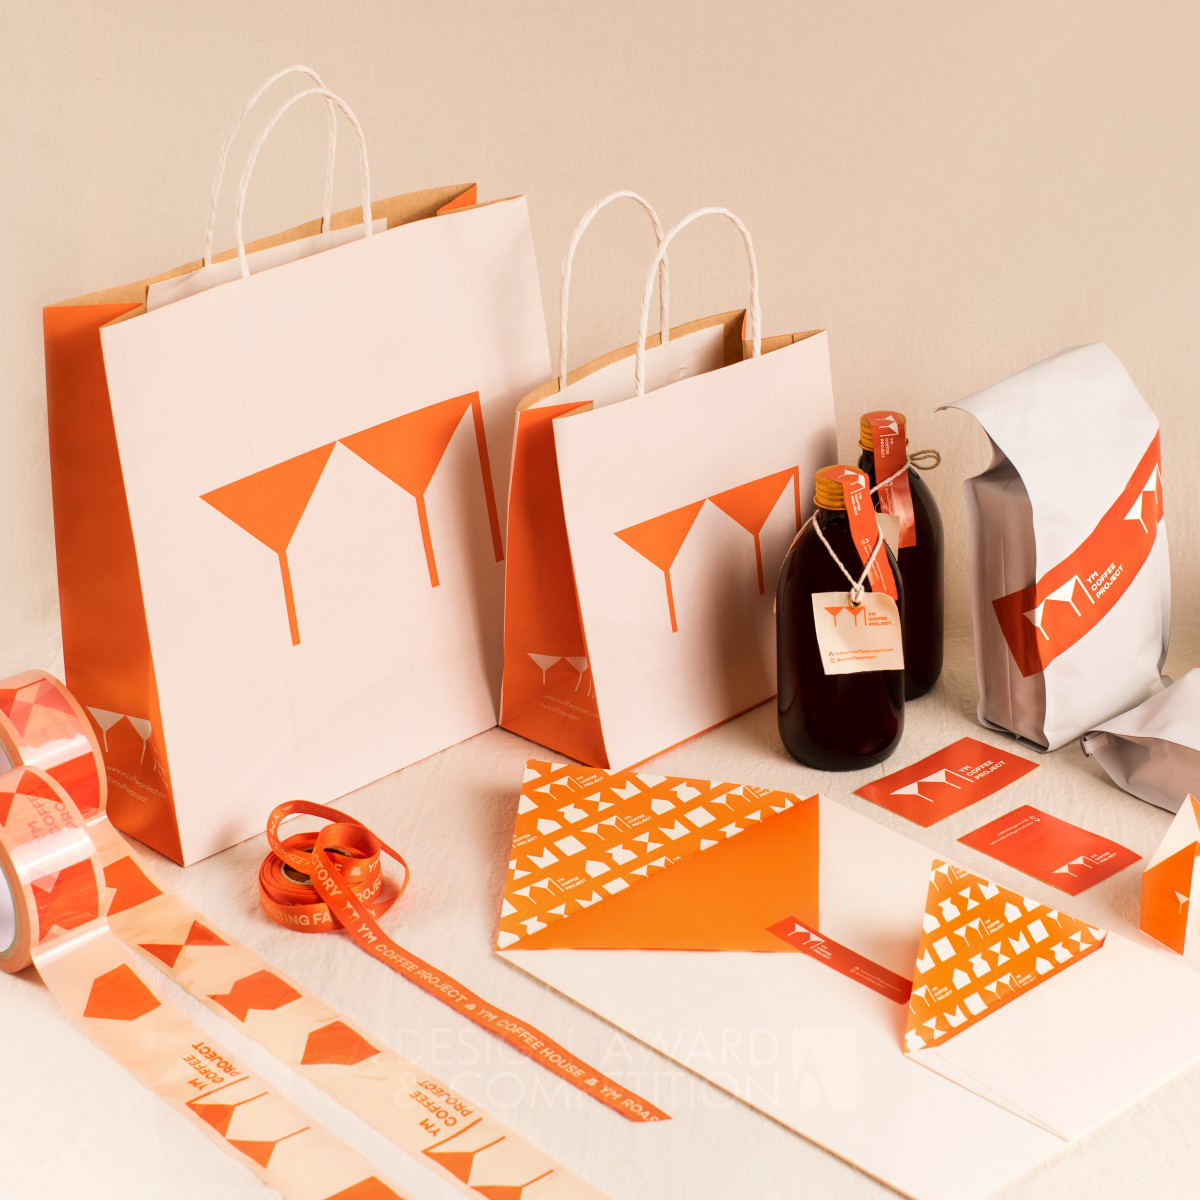 YM Coffee Project Brand Identity by Bumseok Hong